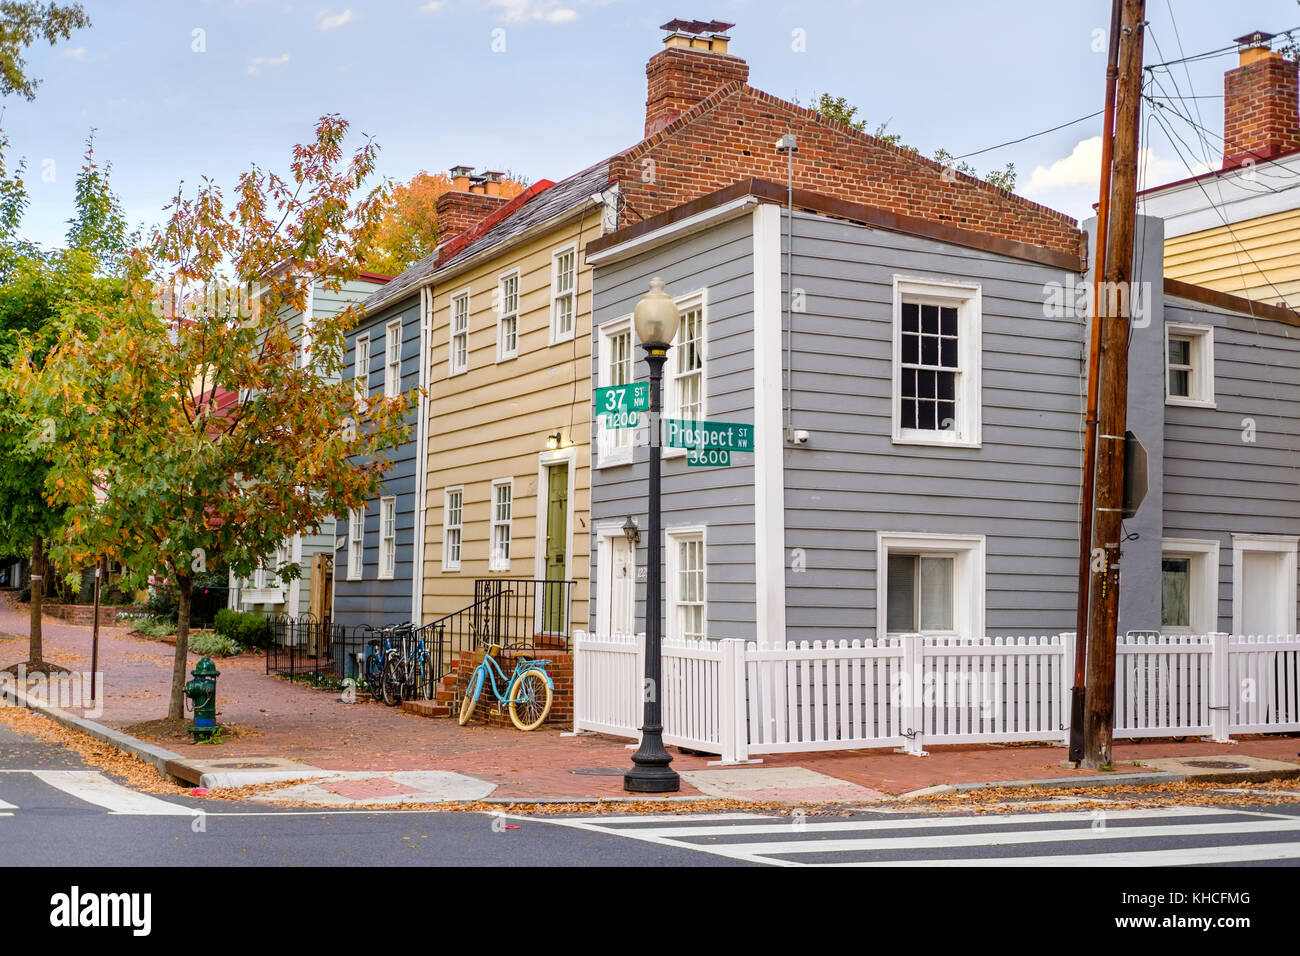 Street view of Cape Cod style homes at the corner of Prospect St NW and 37 St NW in the historic neighborhood of Georgetown, Washington, D.C., USA. Stock Photo